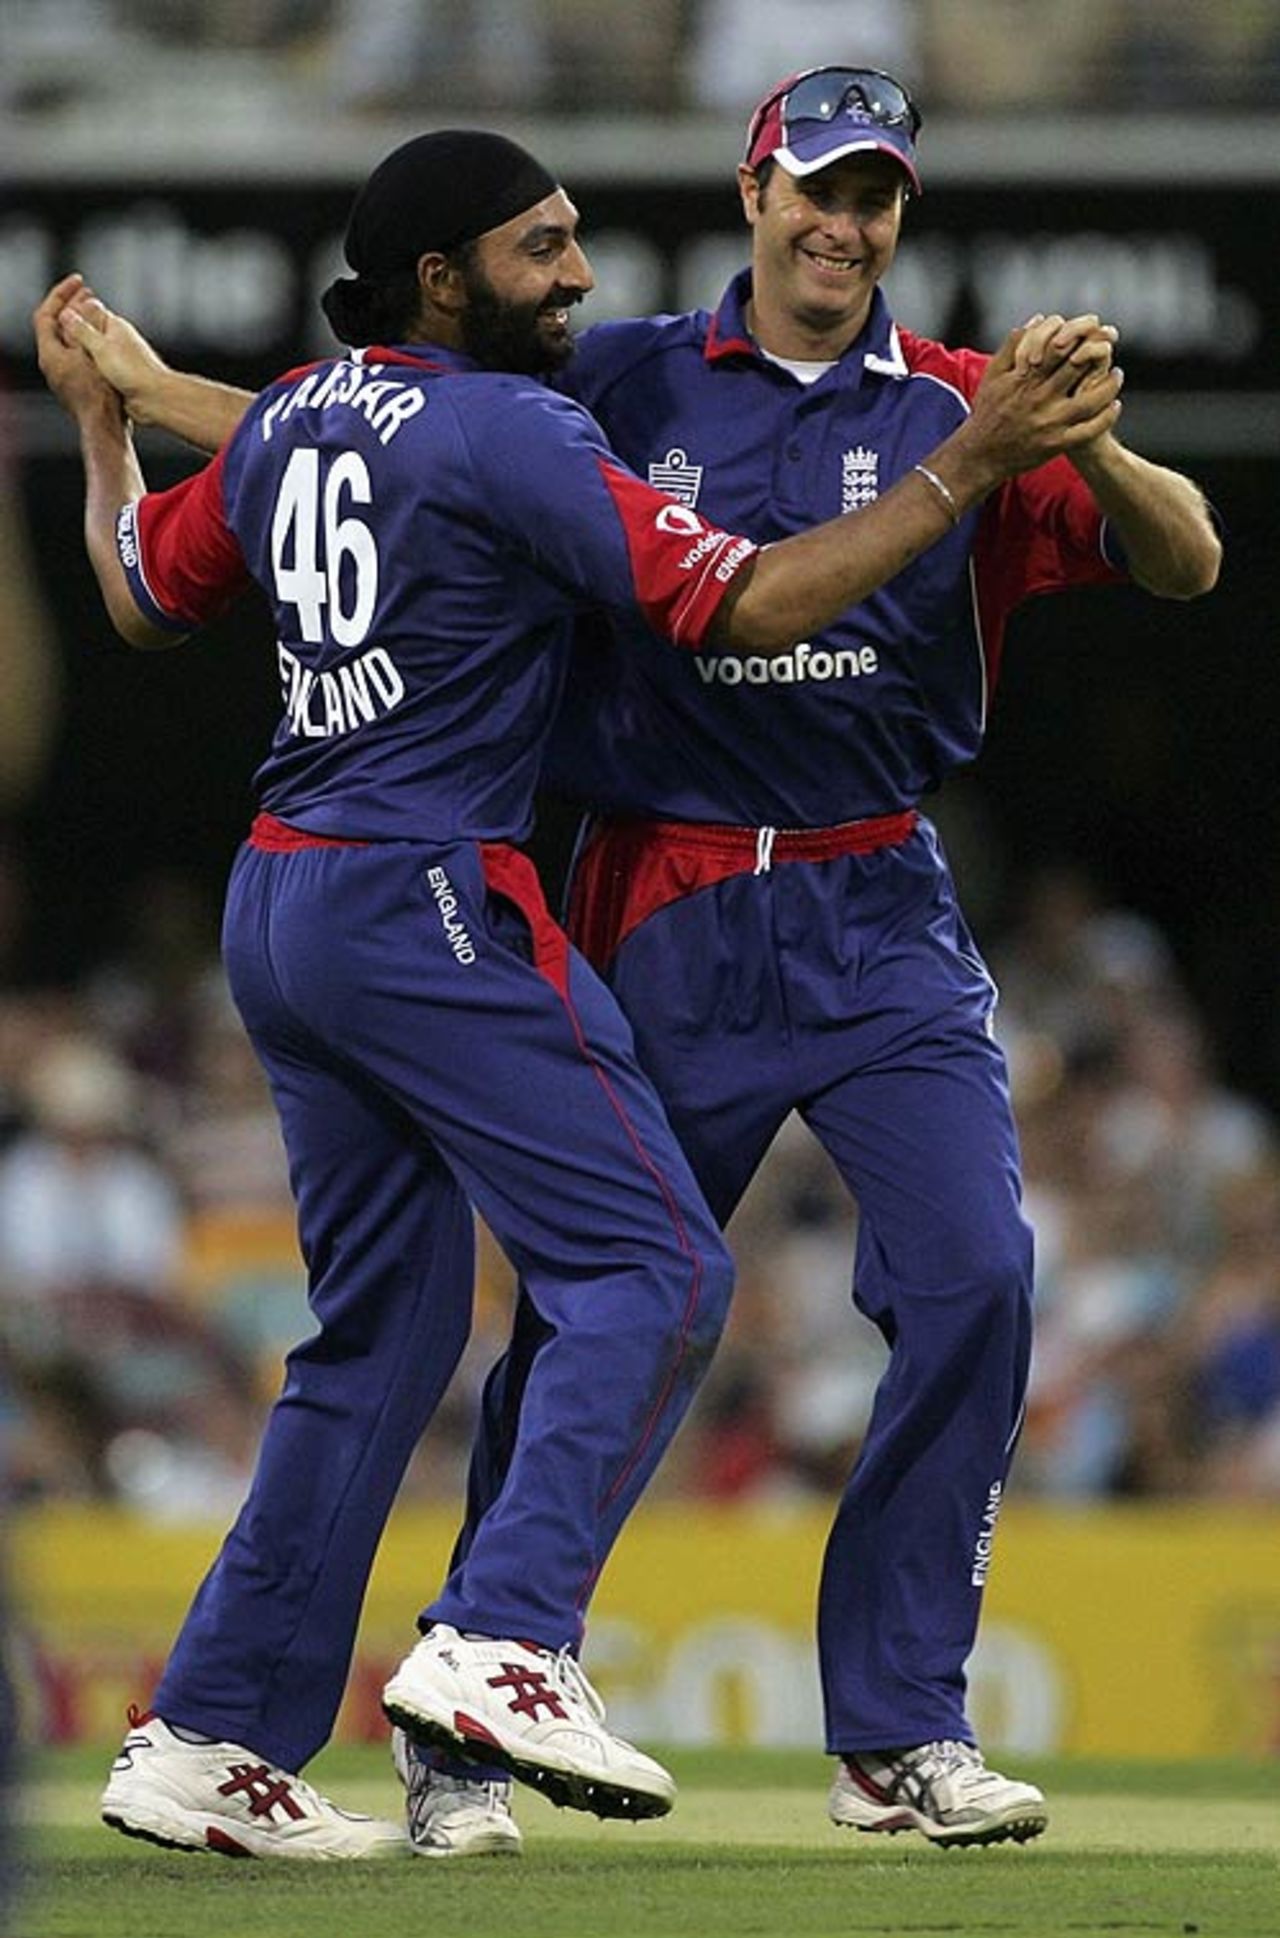 Monty Panesar restored some order for England with the wicket of Lou Vincent, England v New Zealand, CB Series, 12th match, Brisbane, February 6, 2007